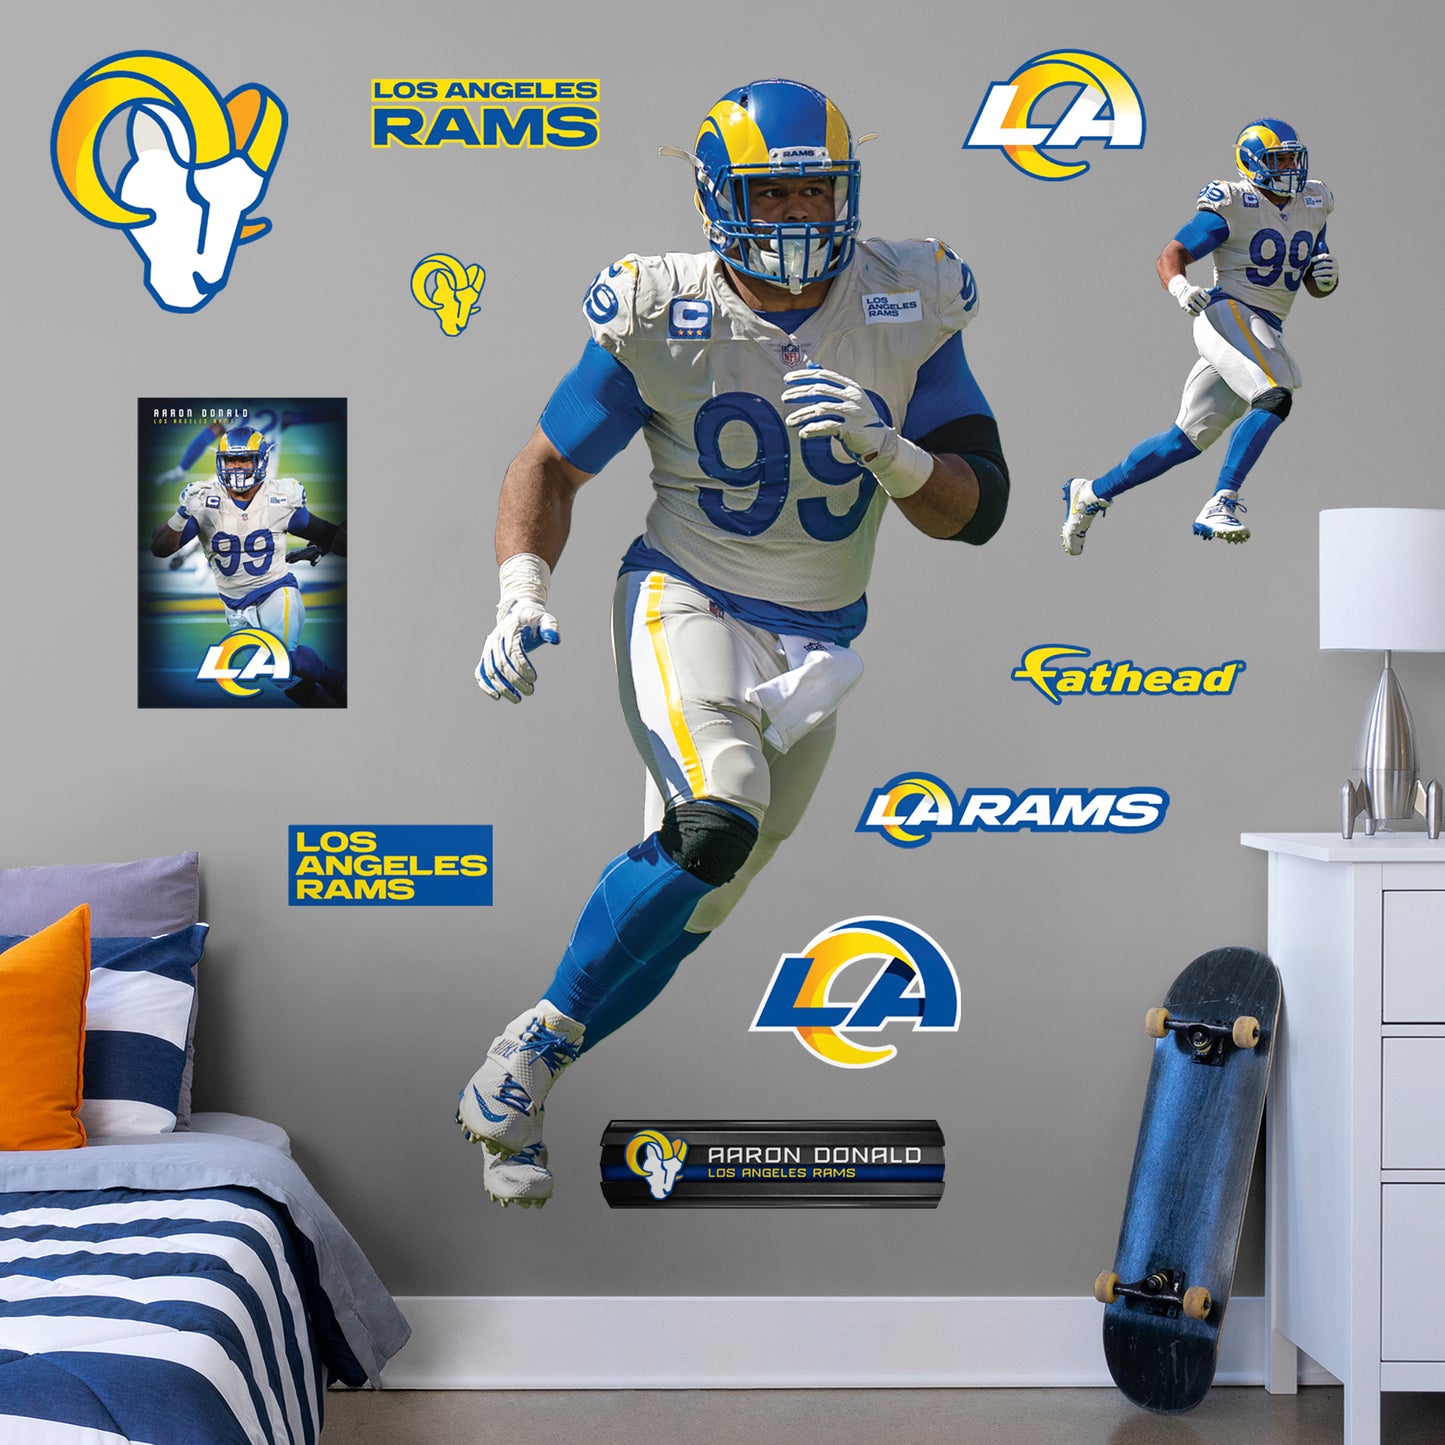 Life-Size Athlete + 11 Decals Rams fans know and love Aaron Donald as the star defensive tackle from their favorite team and now they can bring home that Los Angeles pride with an Aaron Donald Removable Wall Decal Set! This wall decal is vibrant and durable so you'll be able to stick it and move it over and over again. Go Rams!